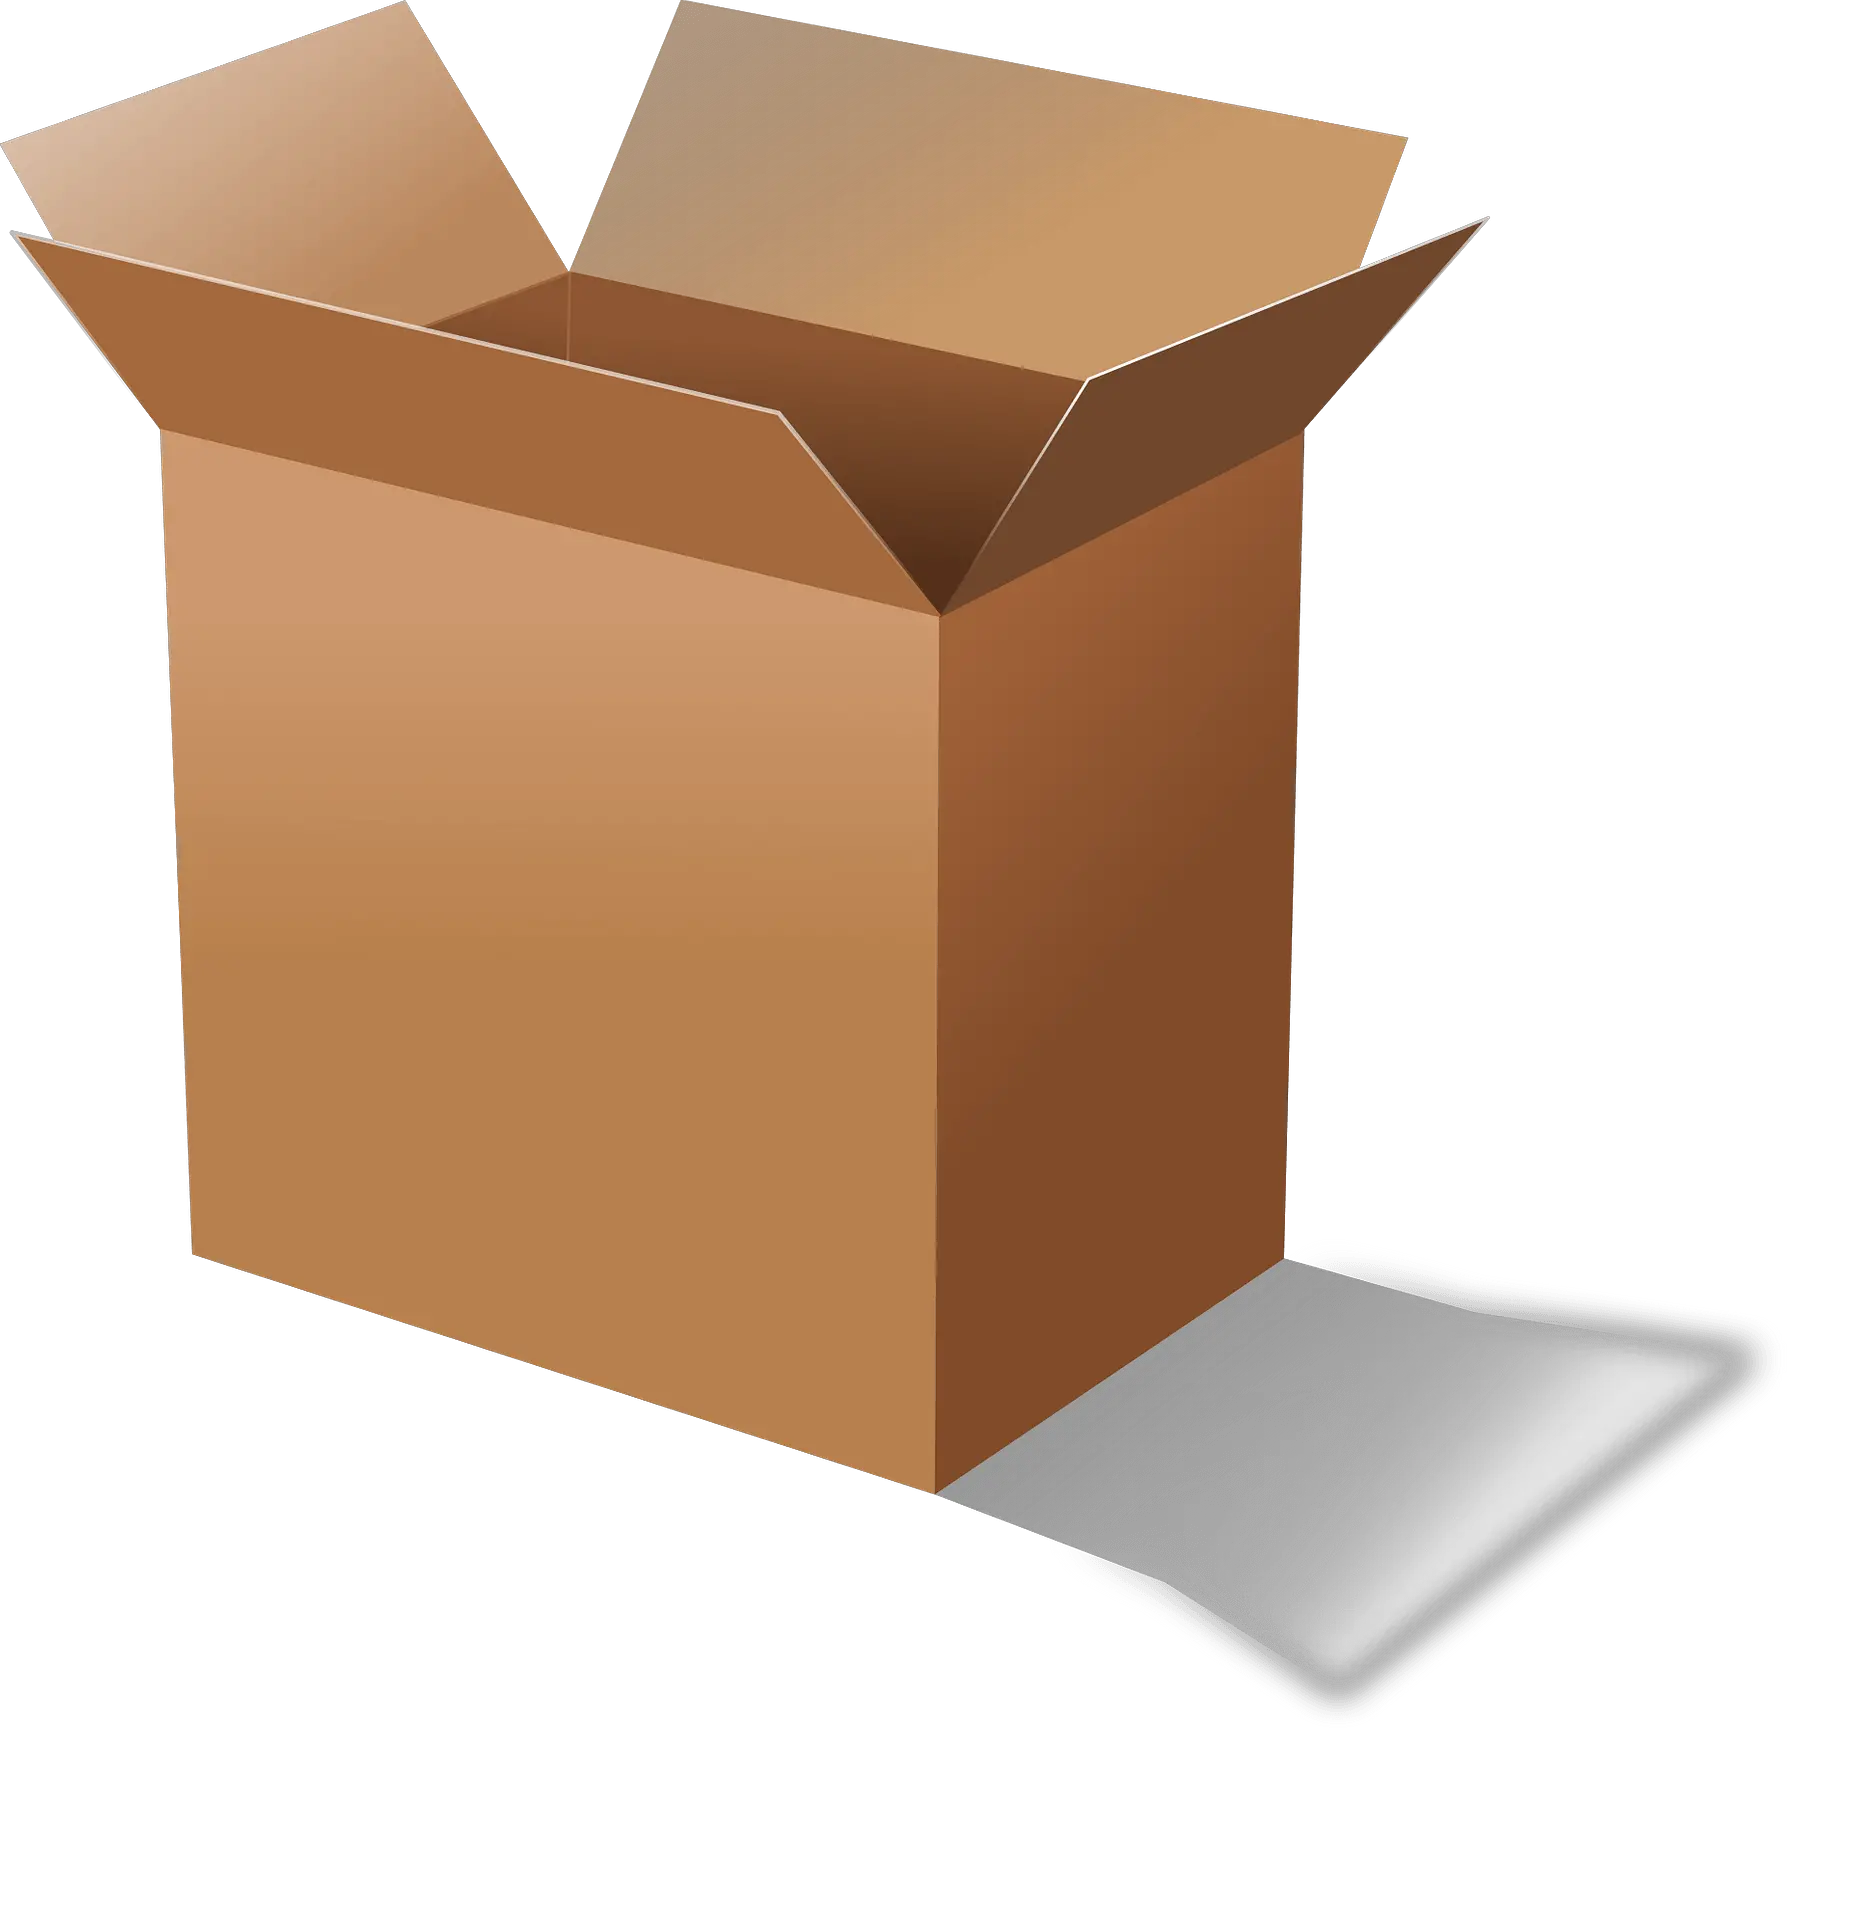 Graphics 4 Light And Color Cardboard Box Hd Png Lit Png